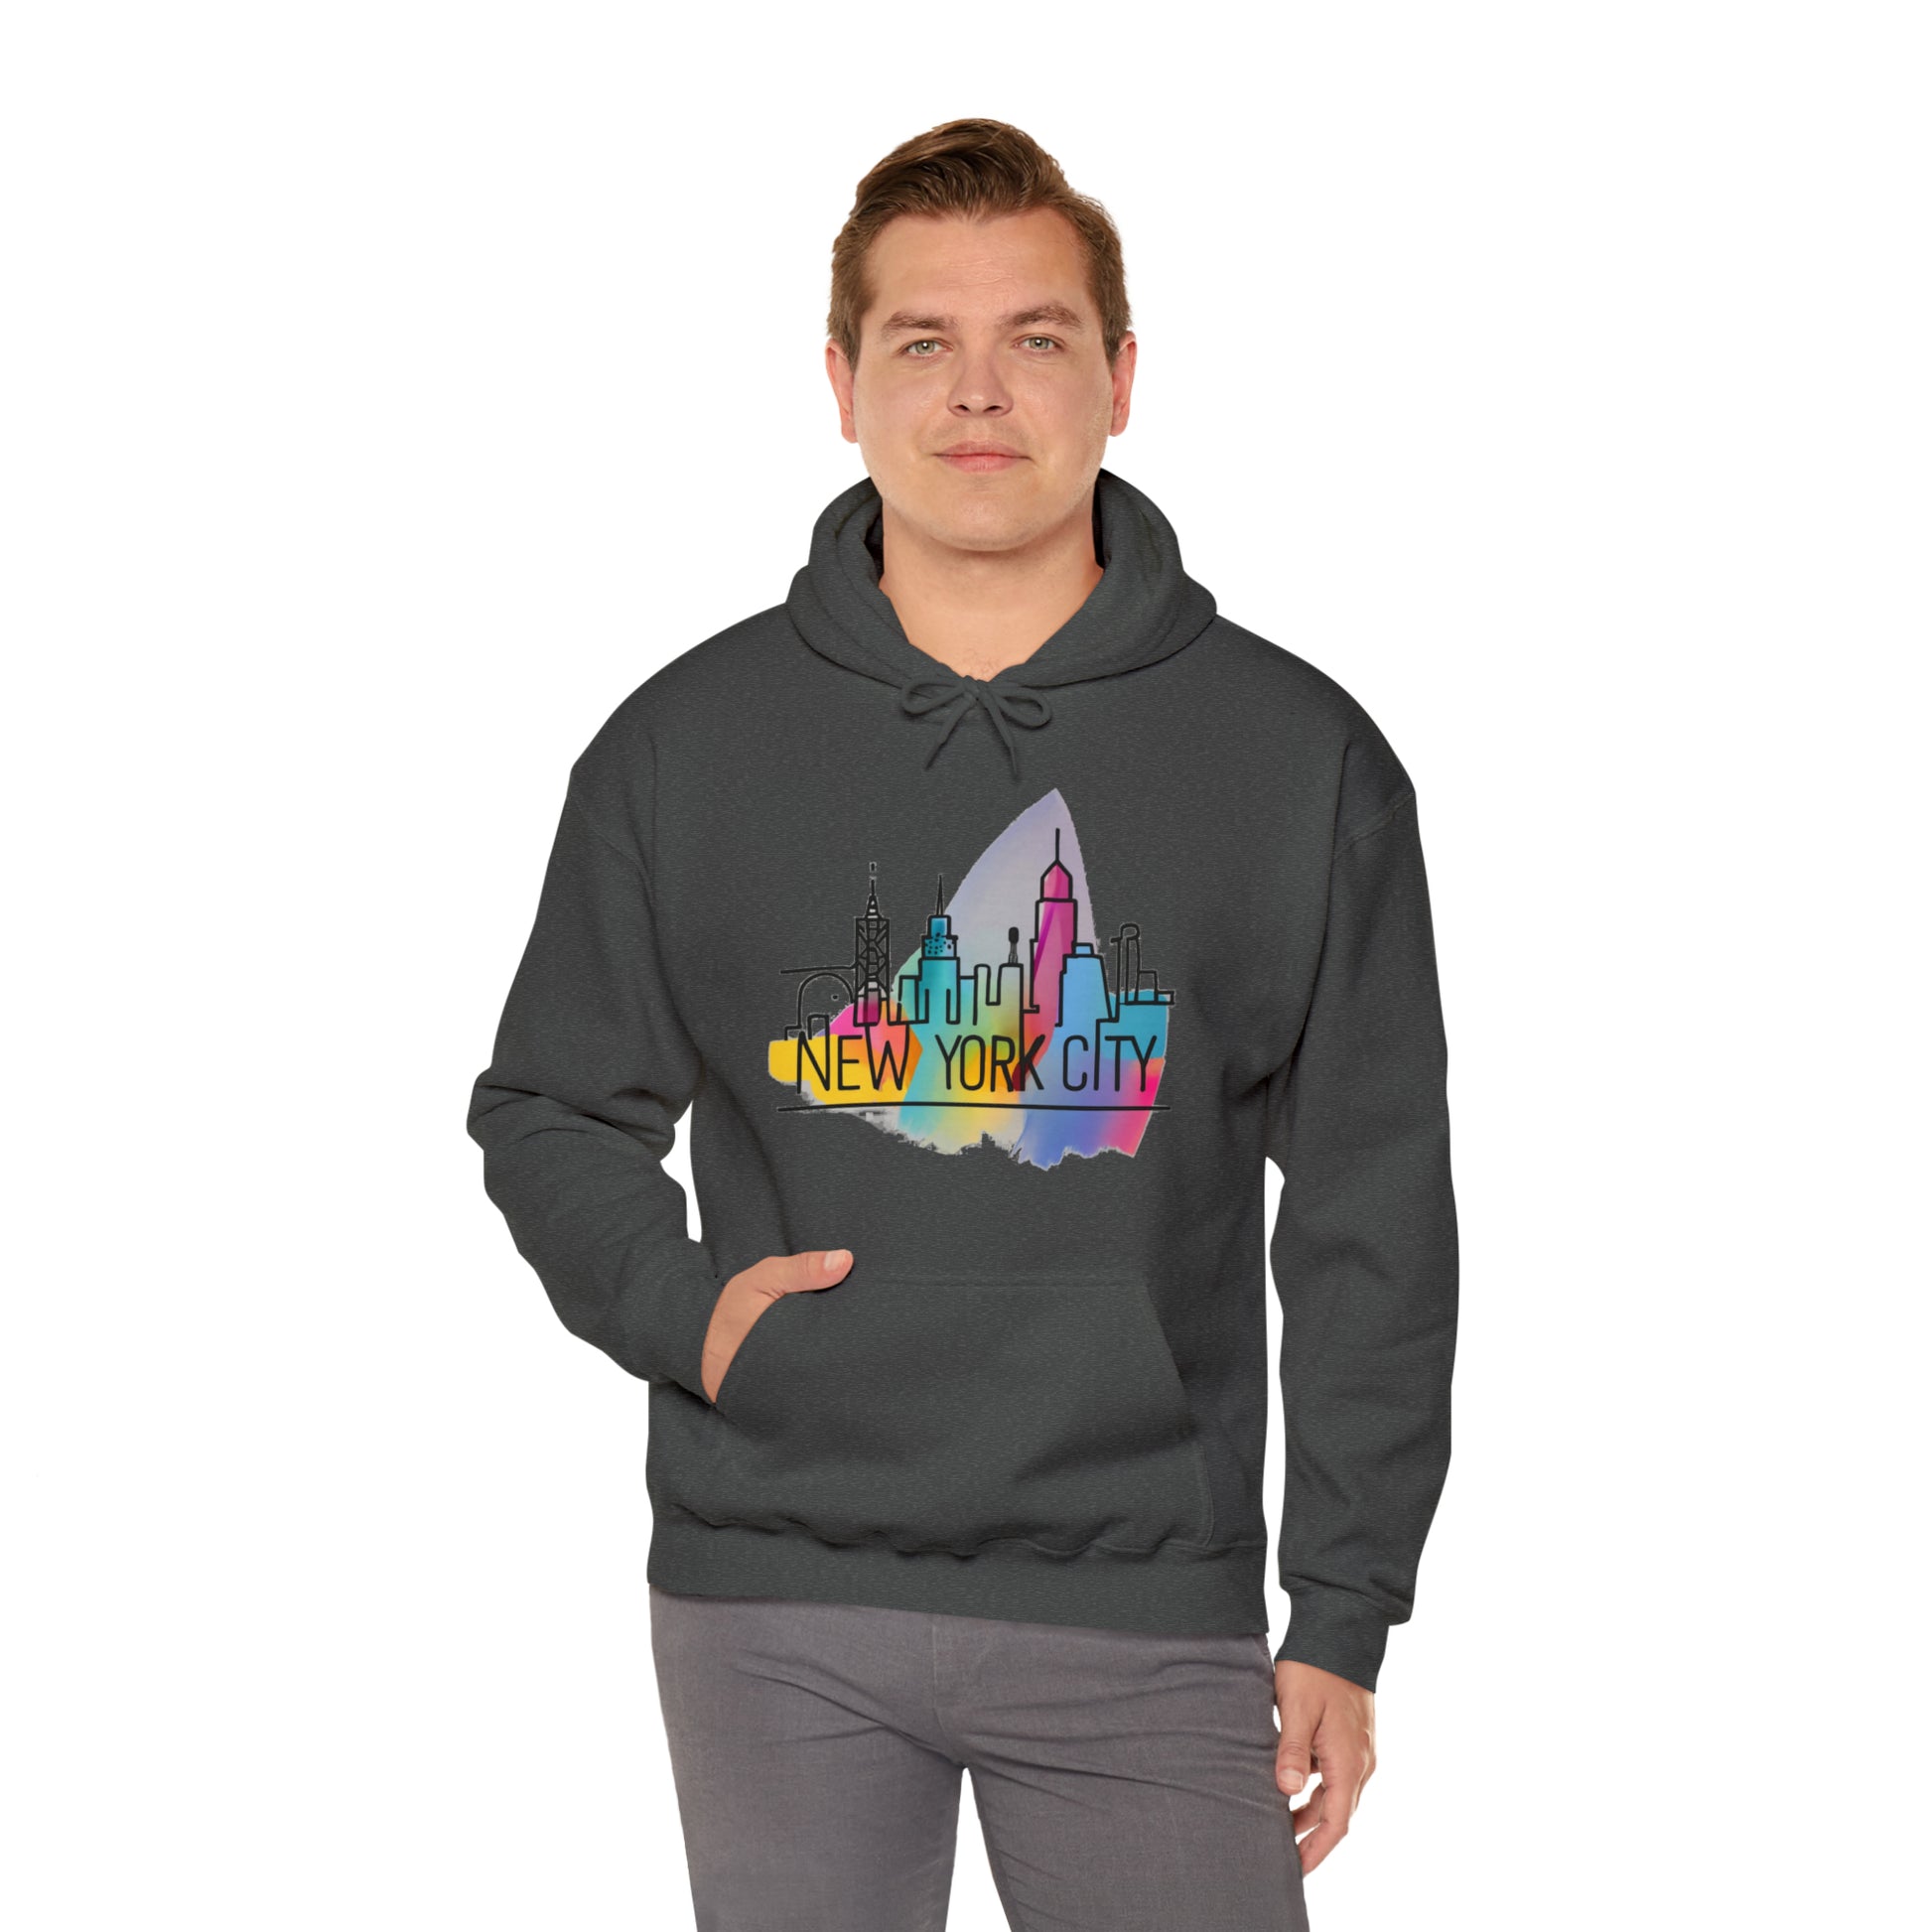 New York City Hoodie, NYC State Manhattan Pullover Men Women Adult Aesthetic Graphic Cotton Hooded Sweatshirt with Pockets Starcove Fashion